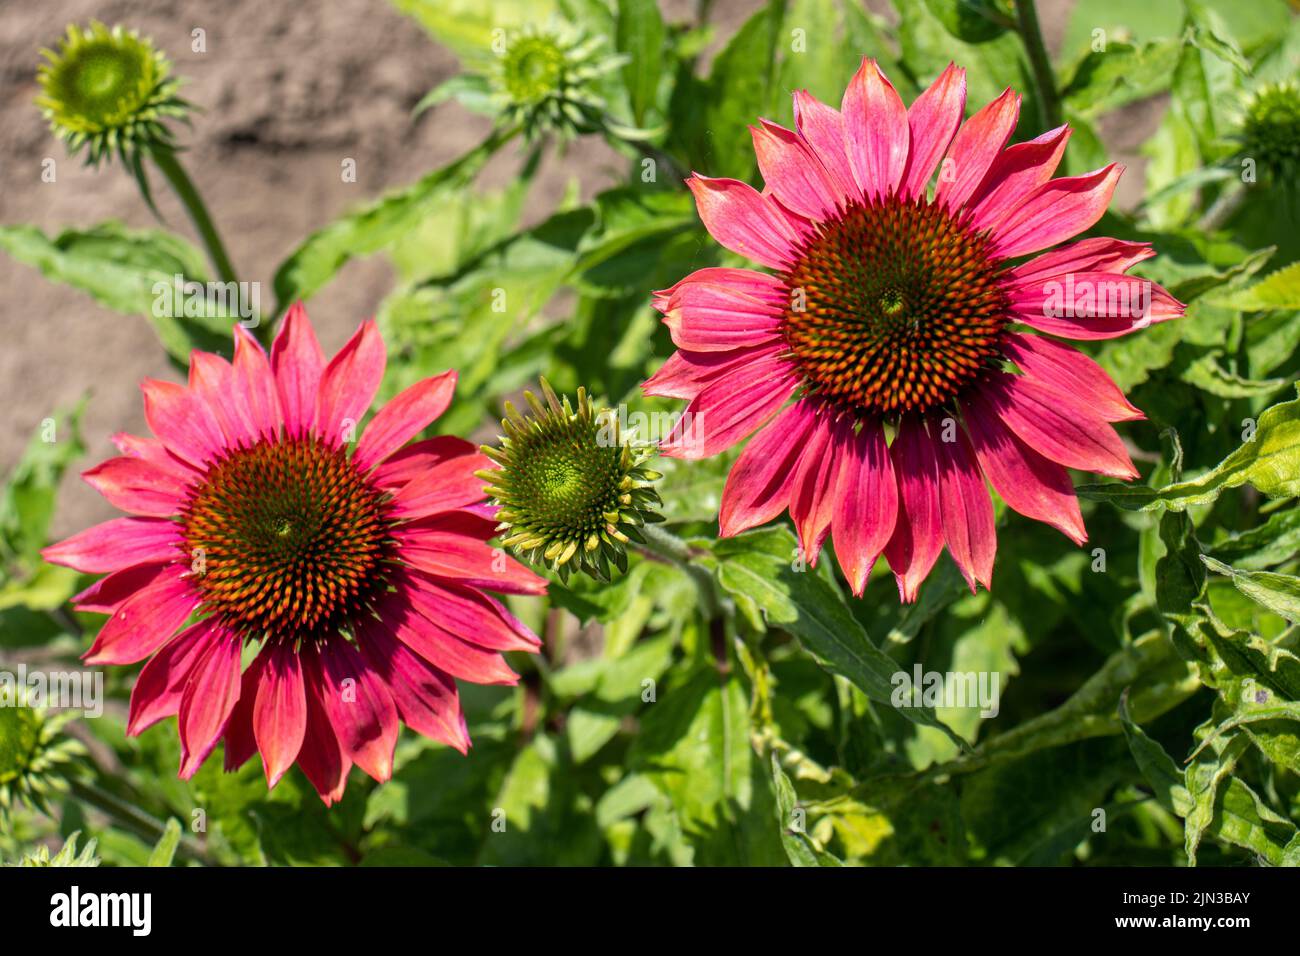 Echinacea purpurea pink flowers in the summer herbal garden. Beautiful natural floral background with medicinal plant Red Sun Hat. Close up Stock Photo